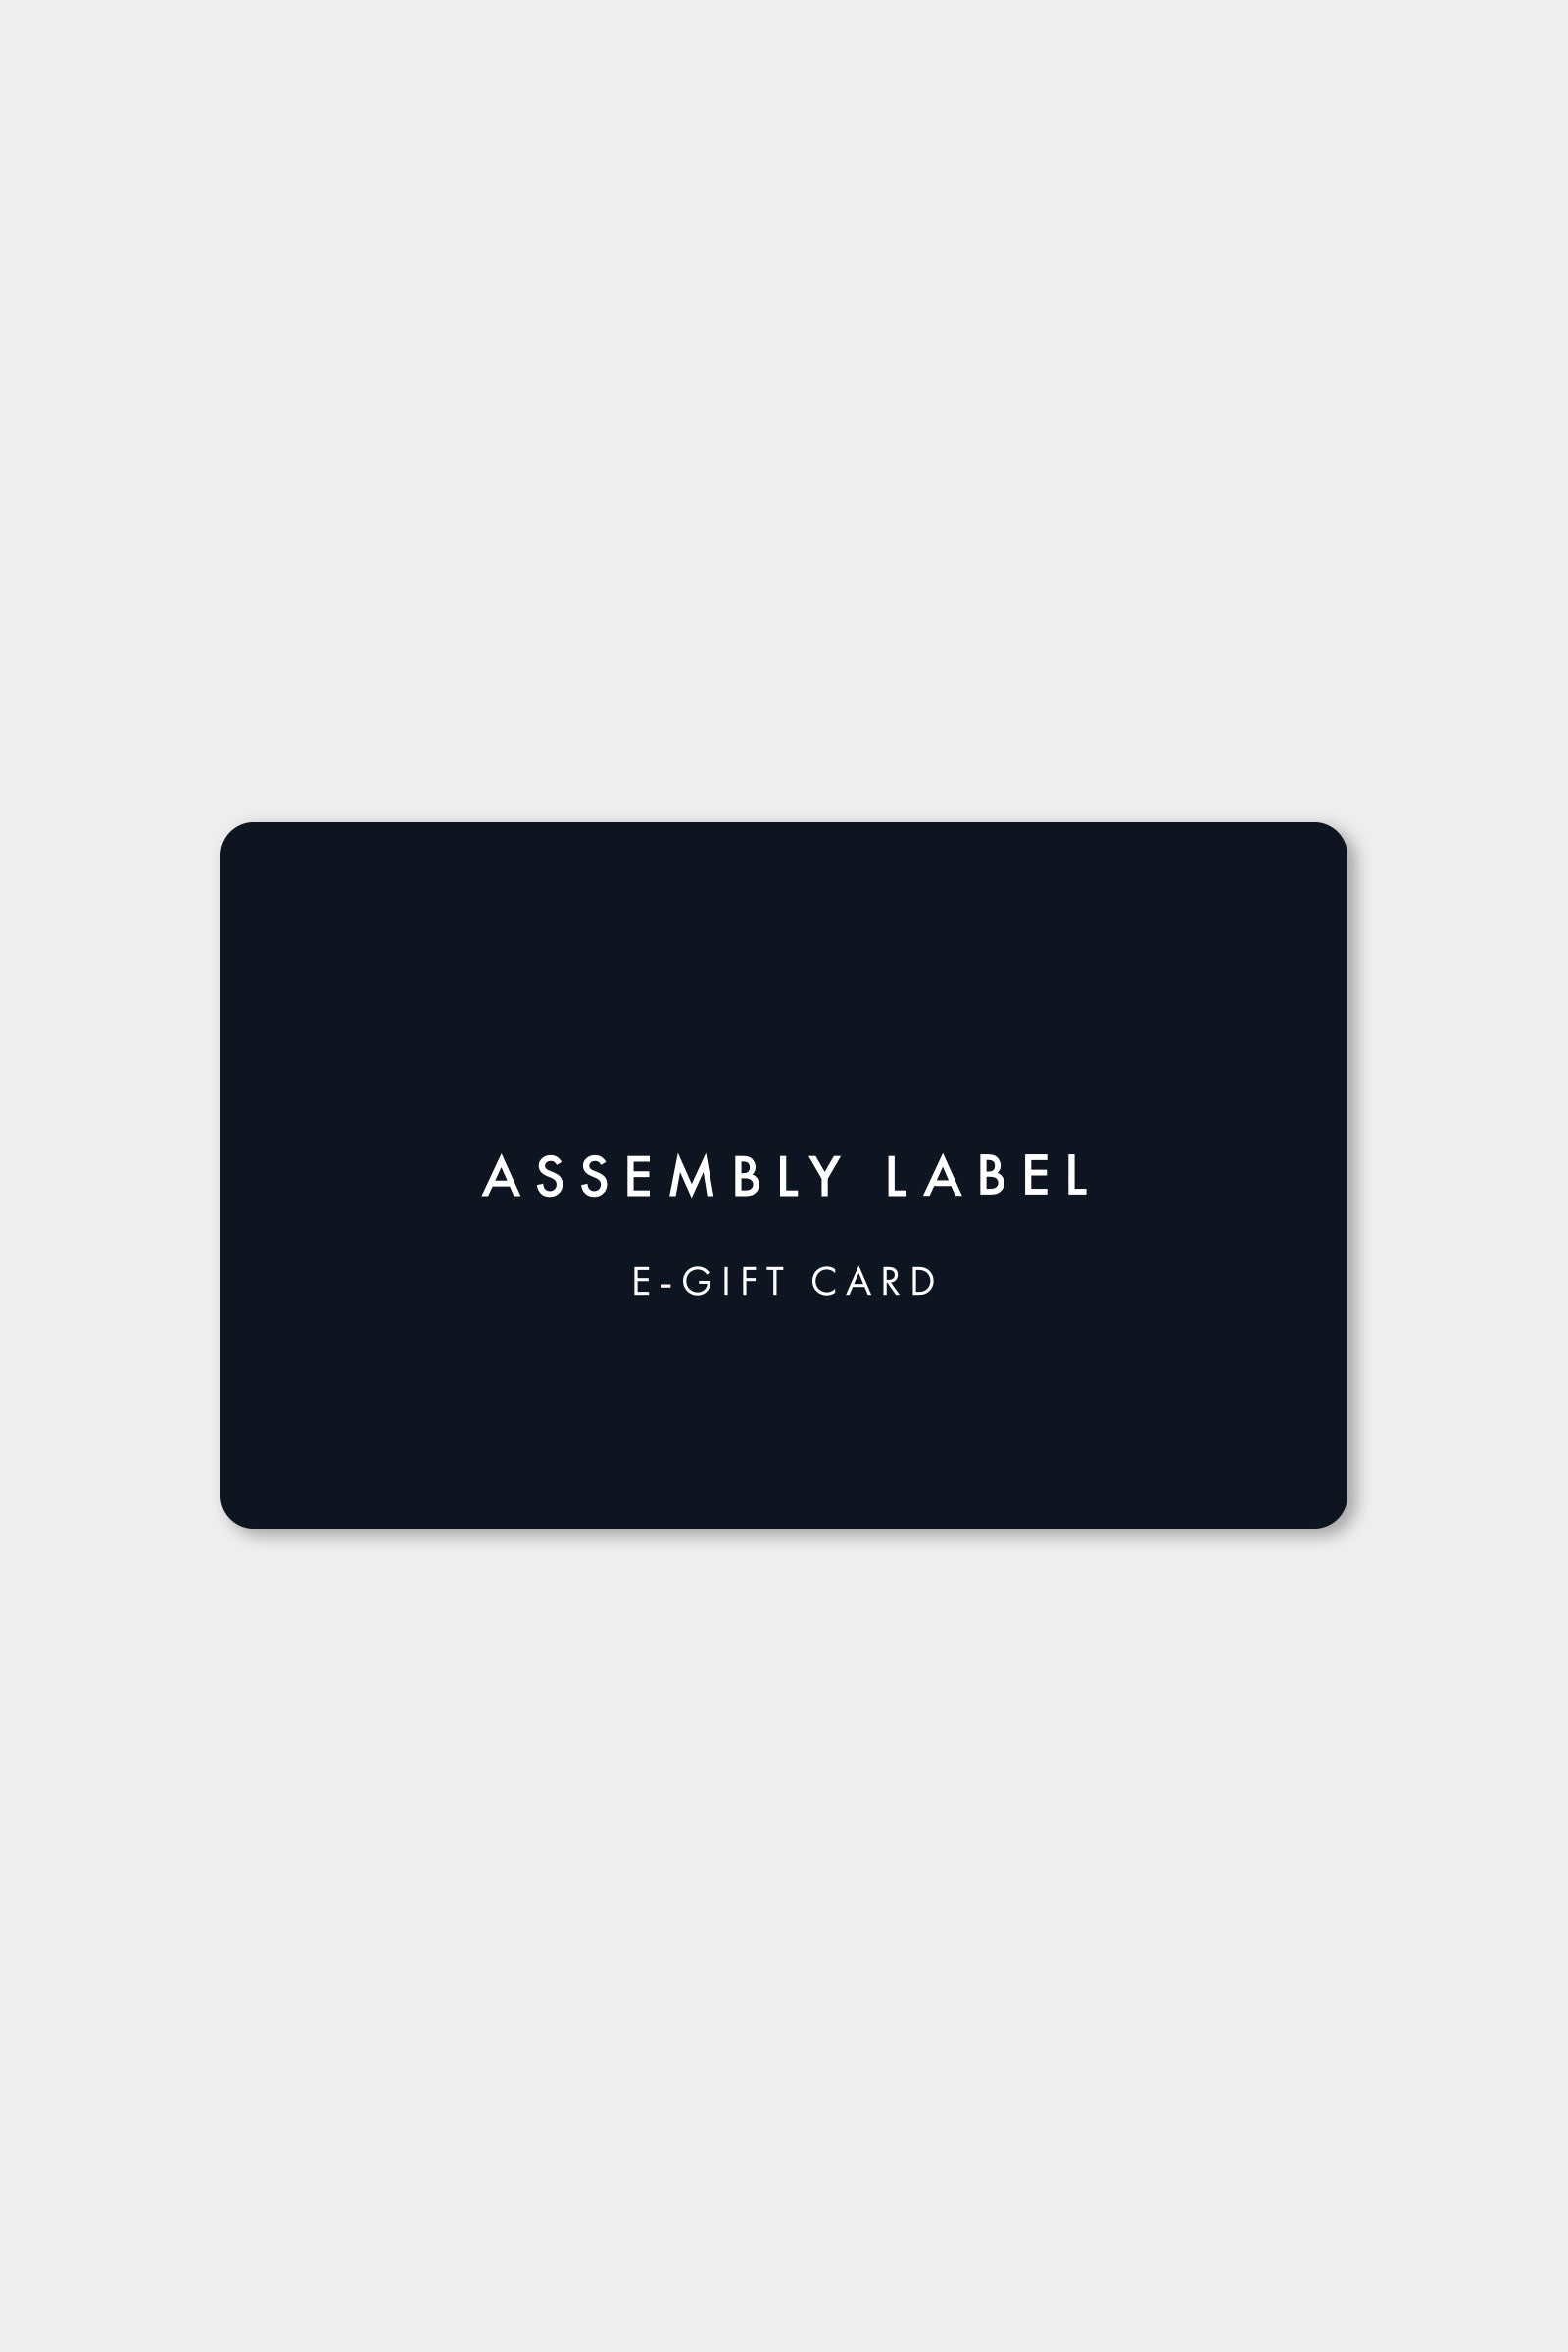 Gift Card, Assembly Label NZ – Assembly Label